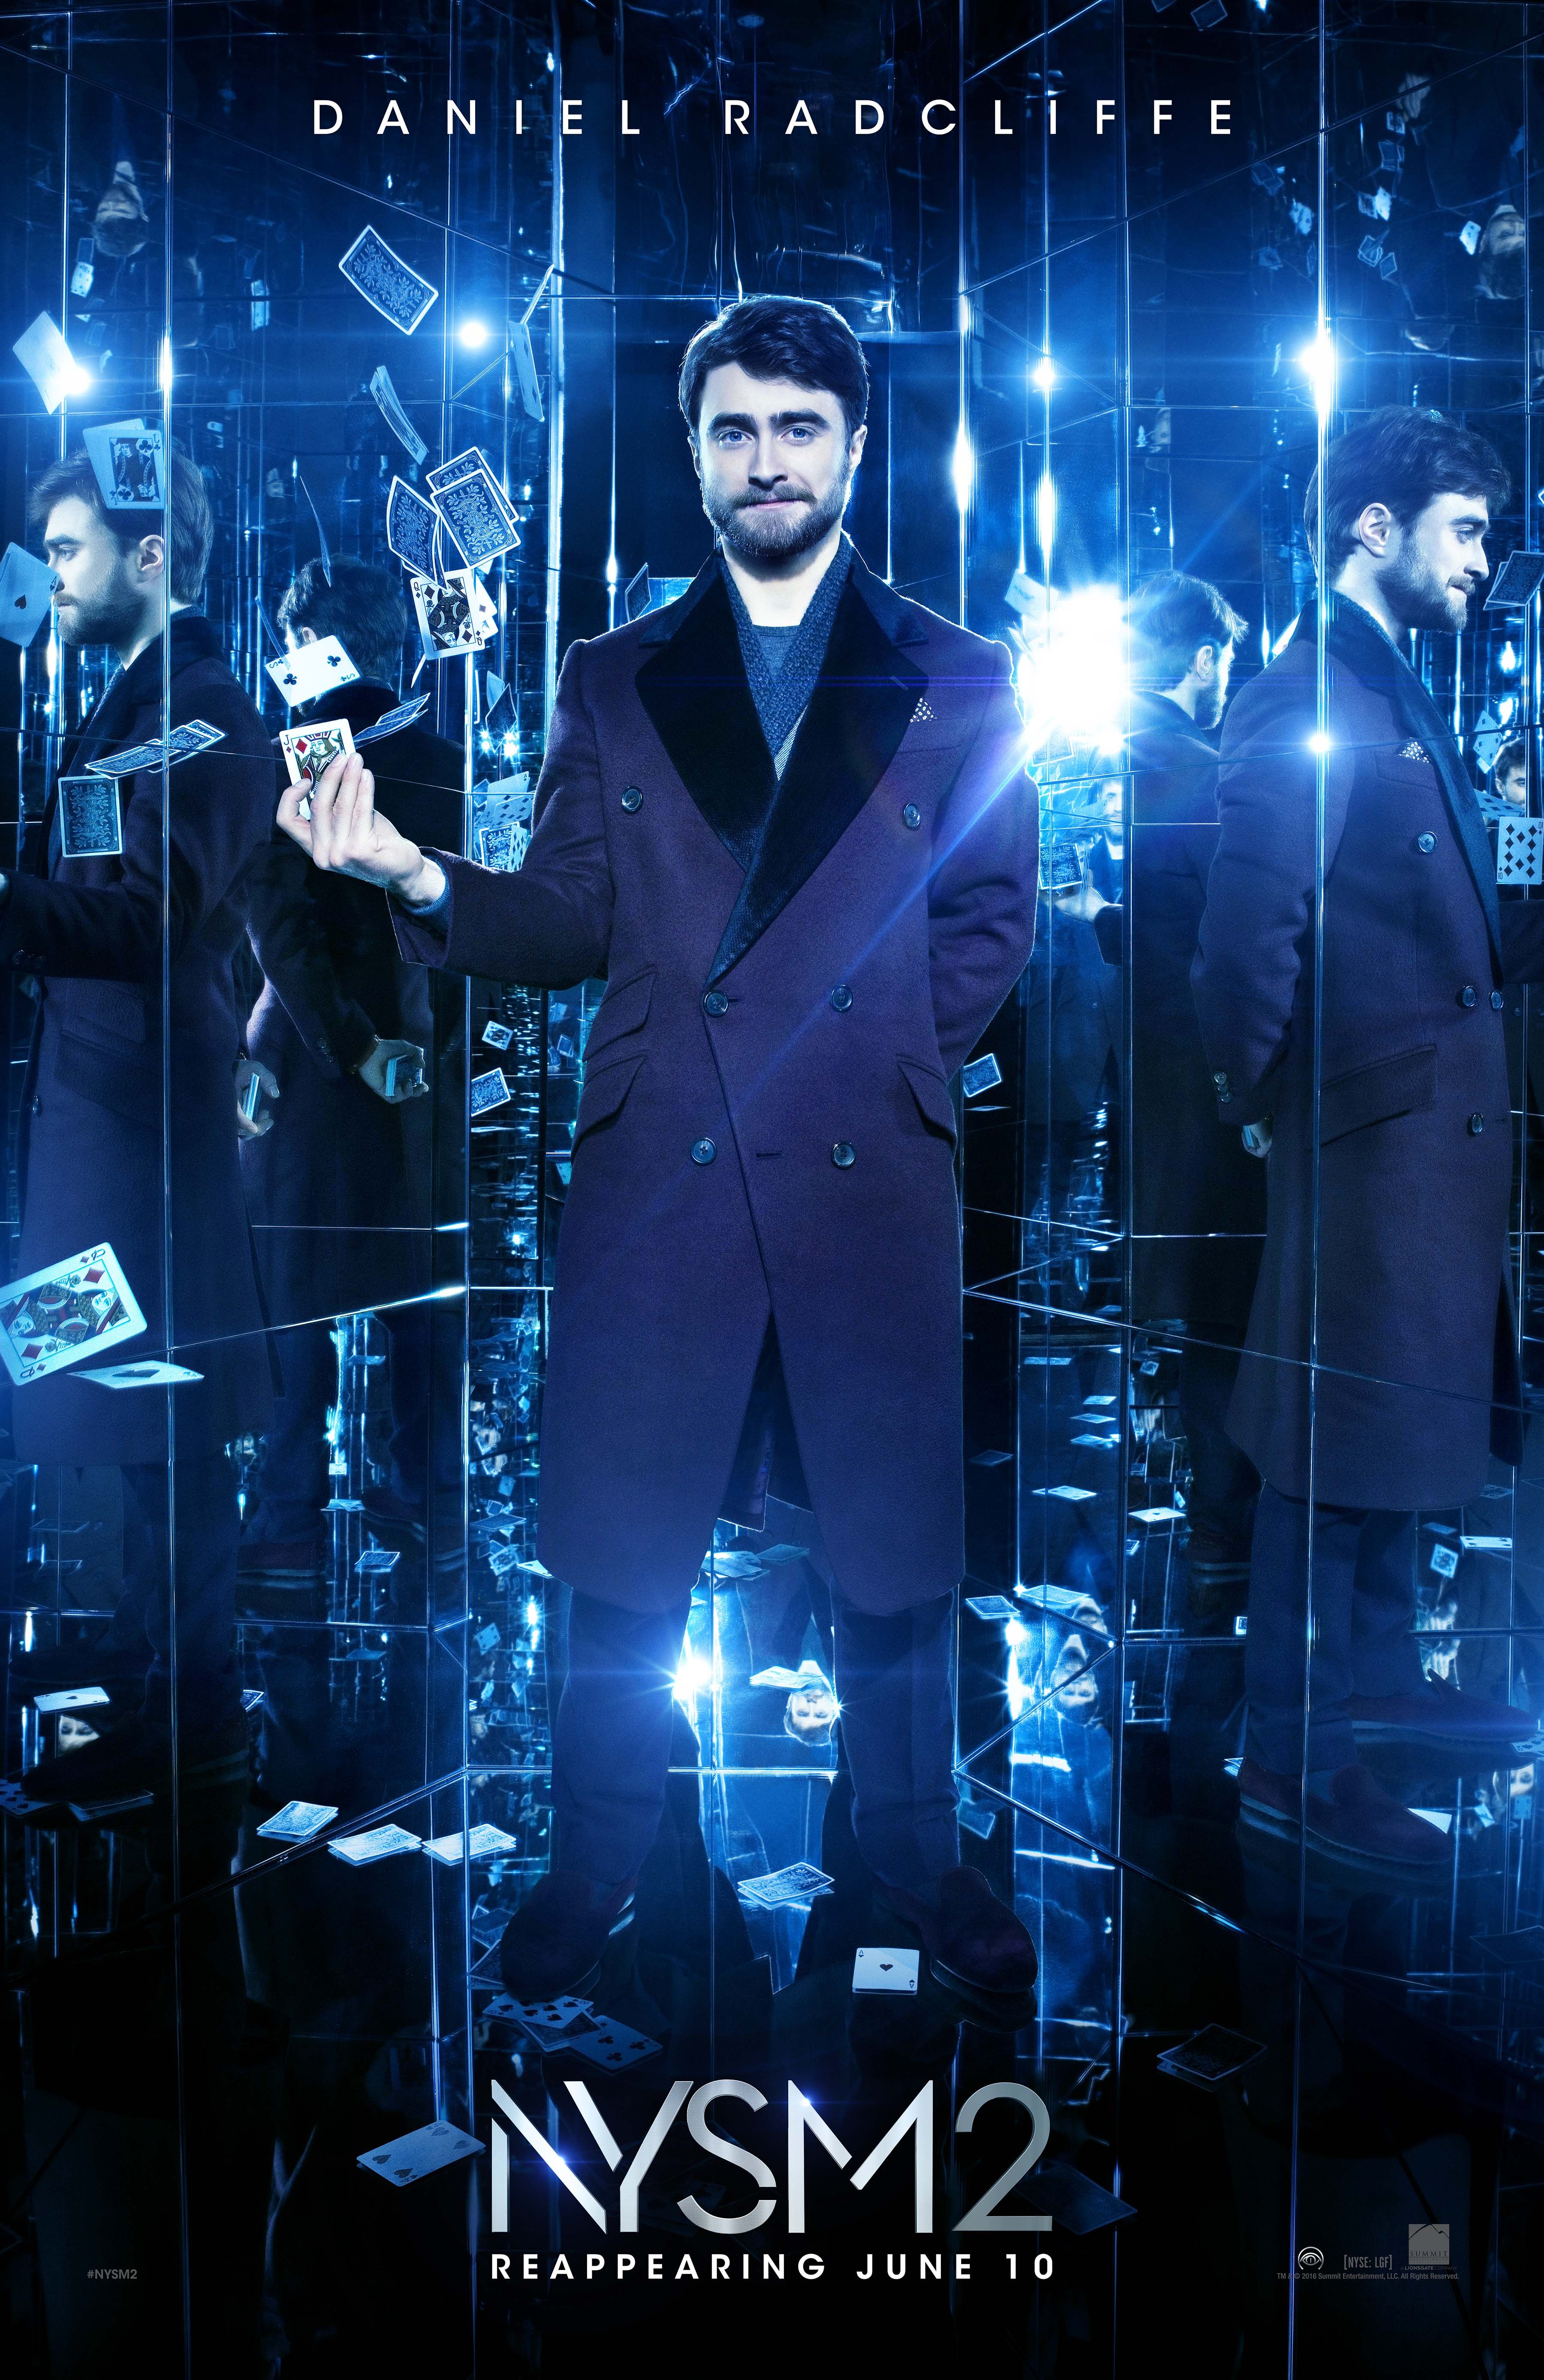 Now You See Me 2: New Puts the Magicians on the Run